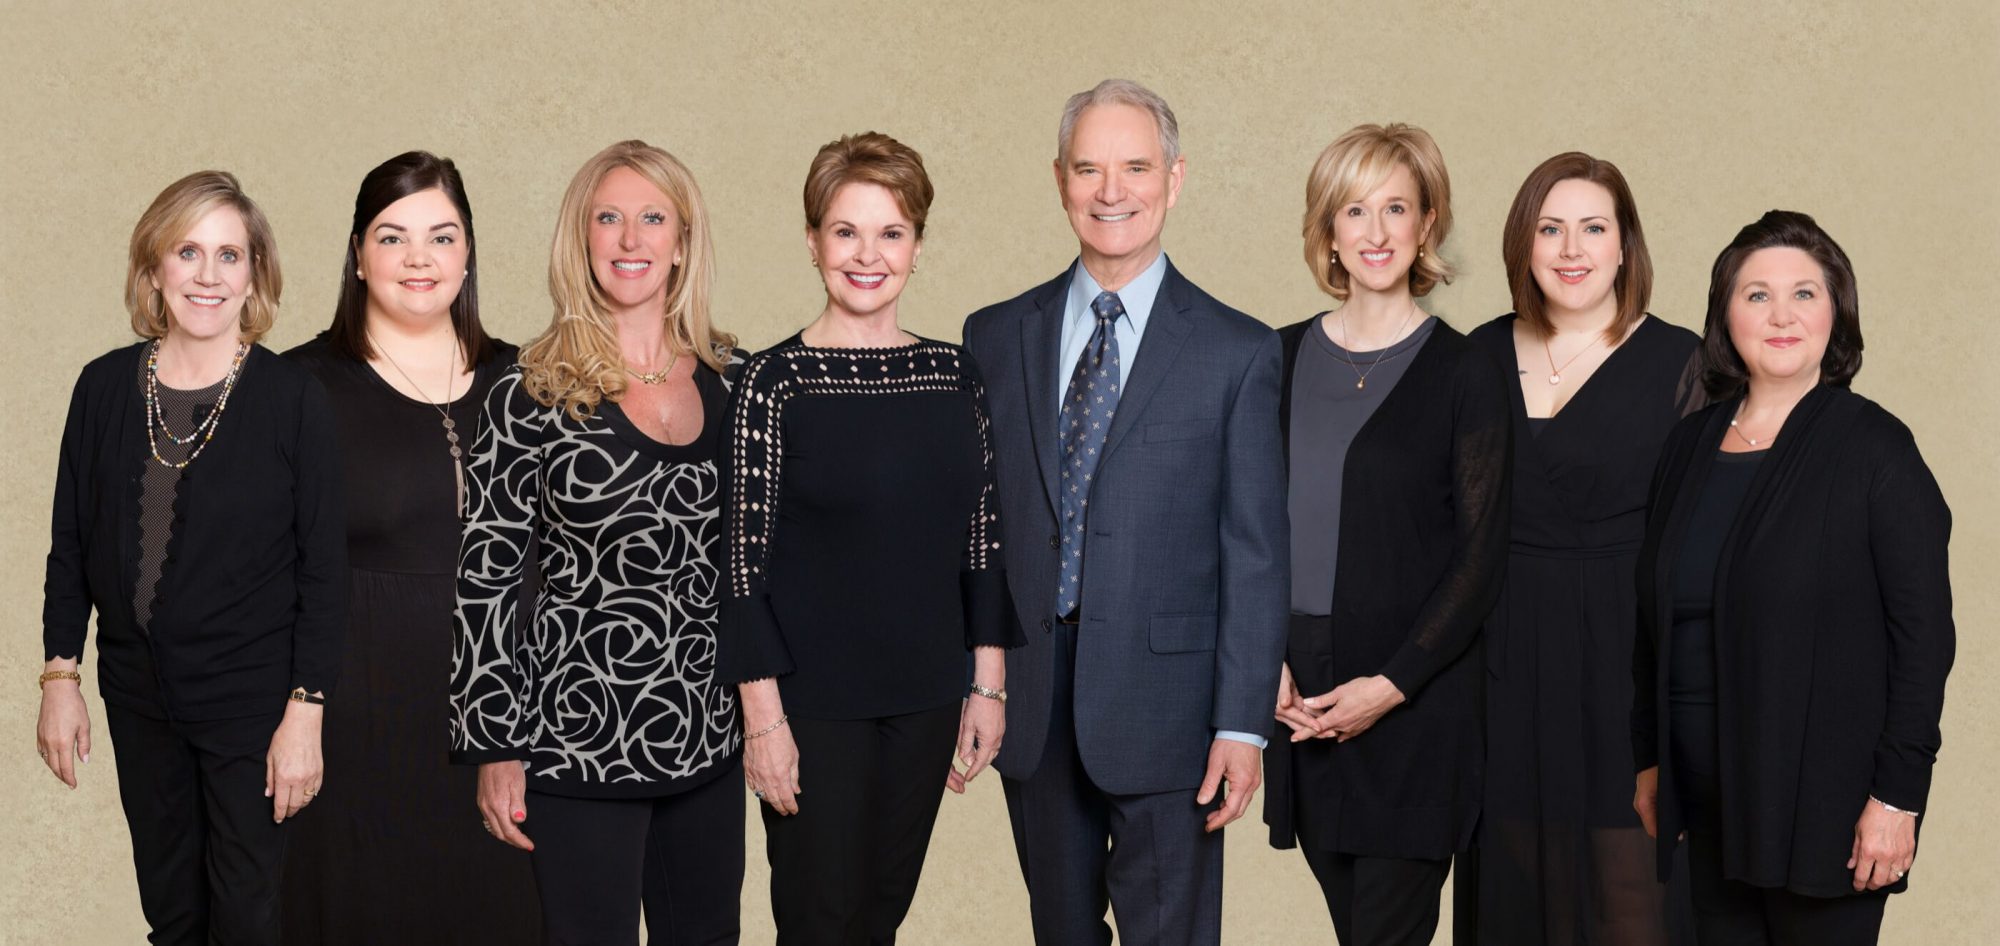 Stephen M. Lazarus, MD, and his Aesthetic Plastic Surgery team